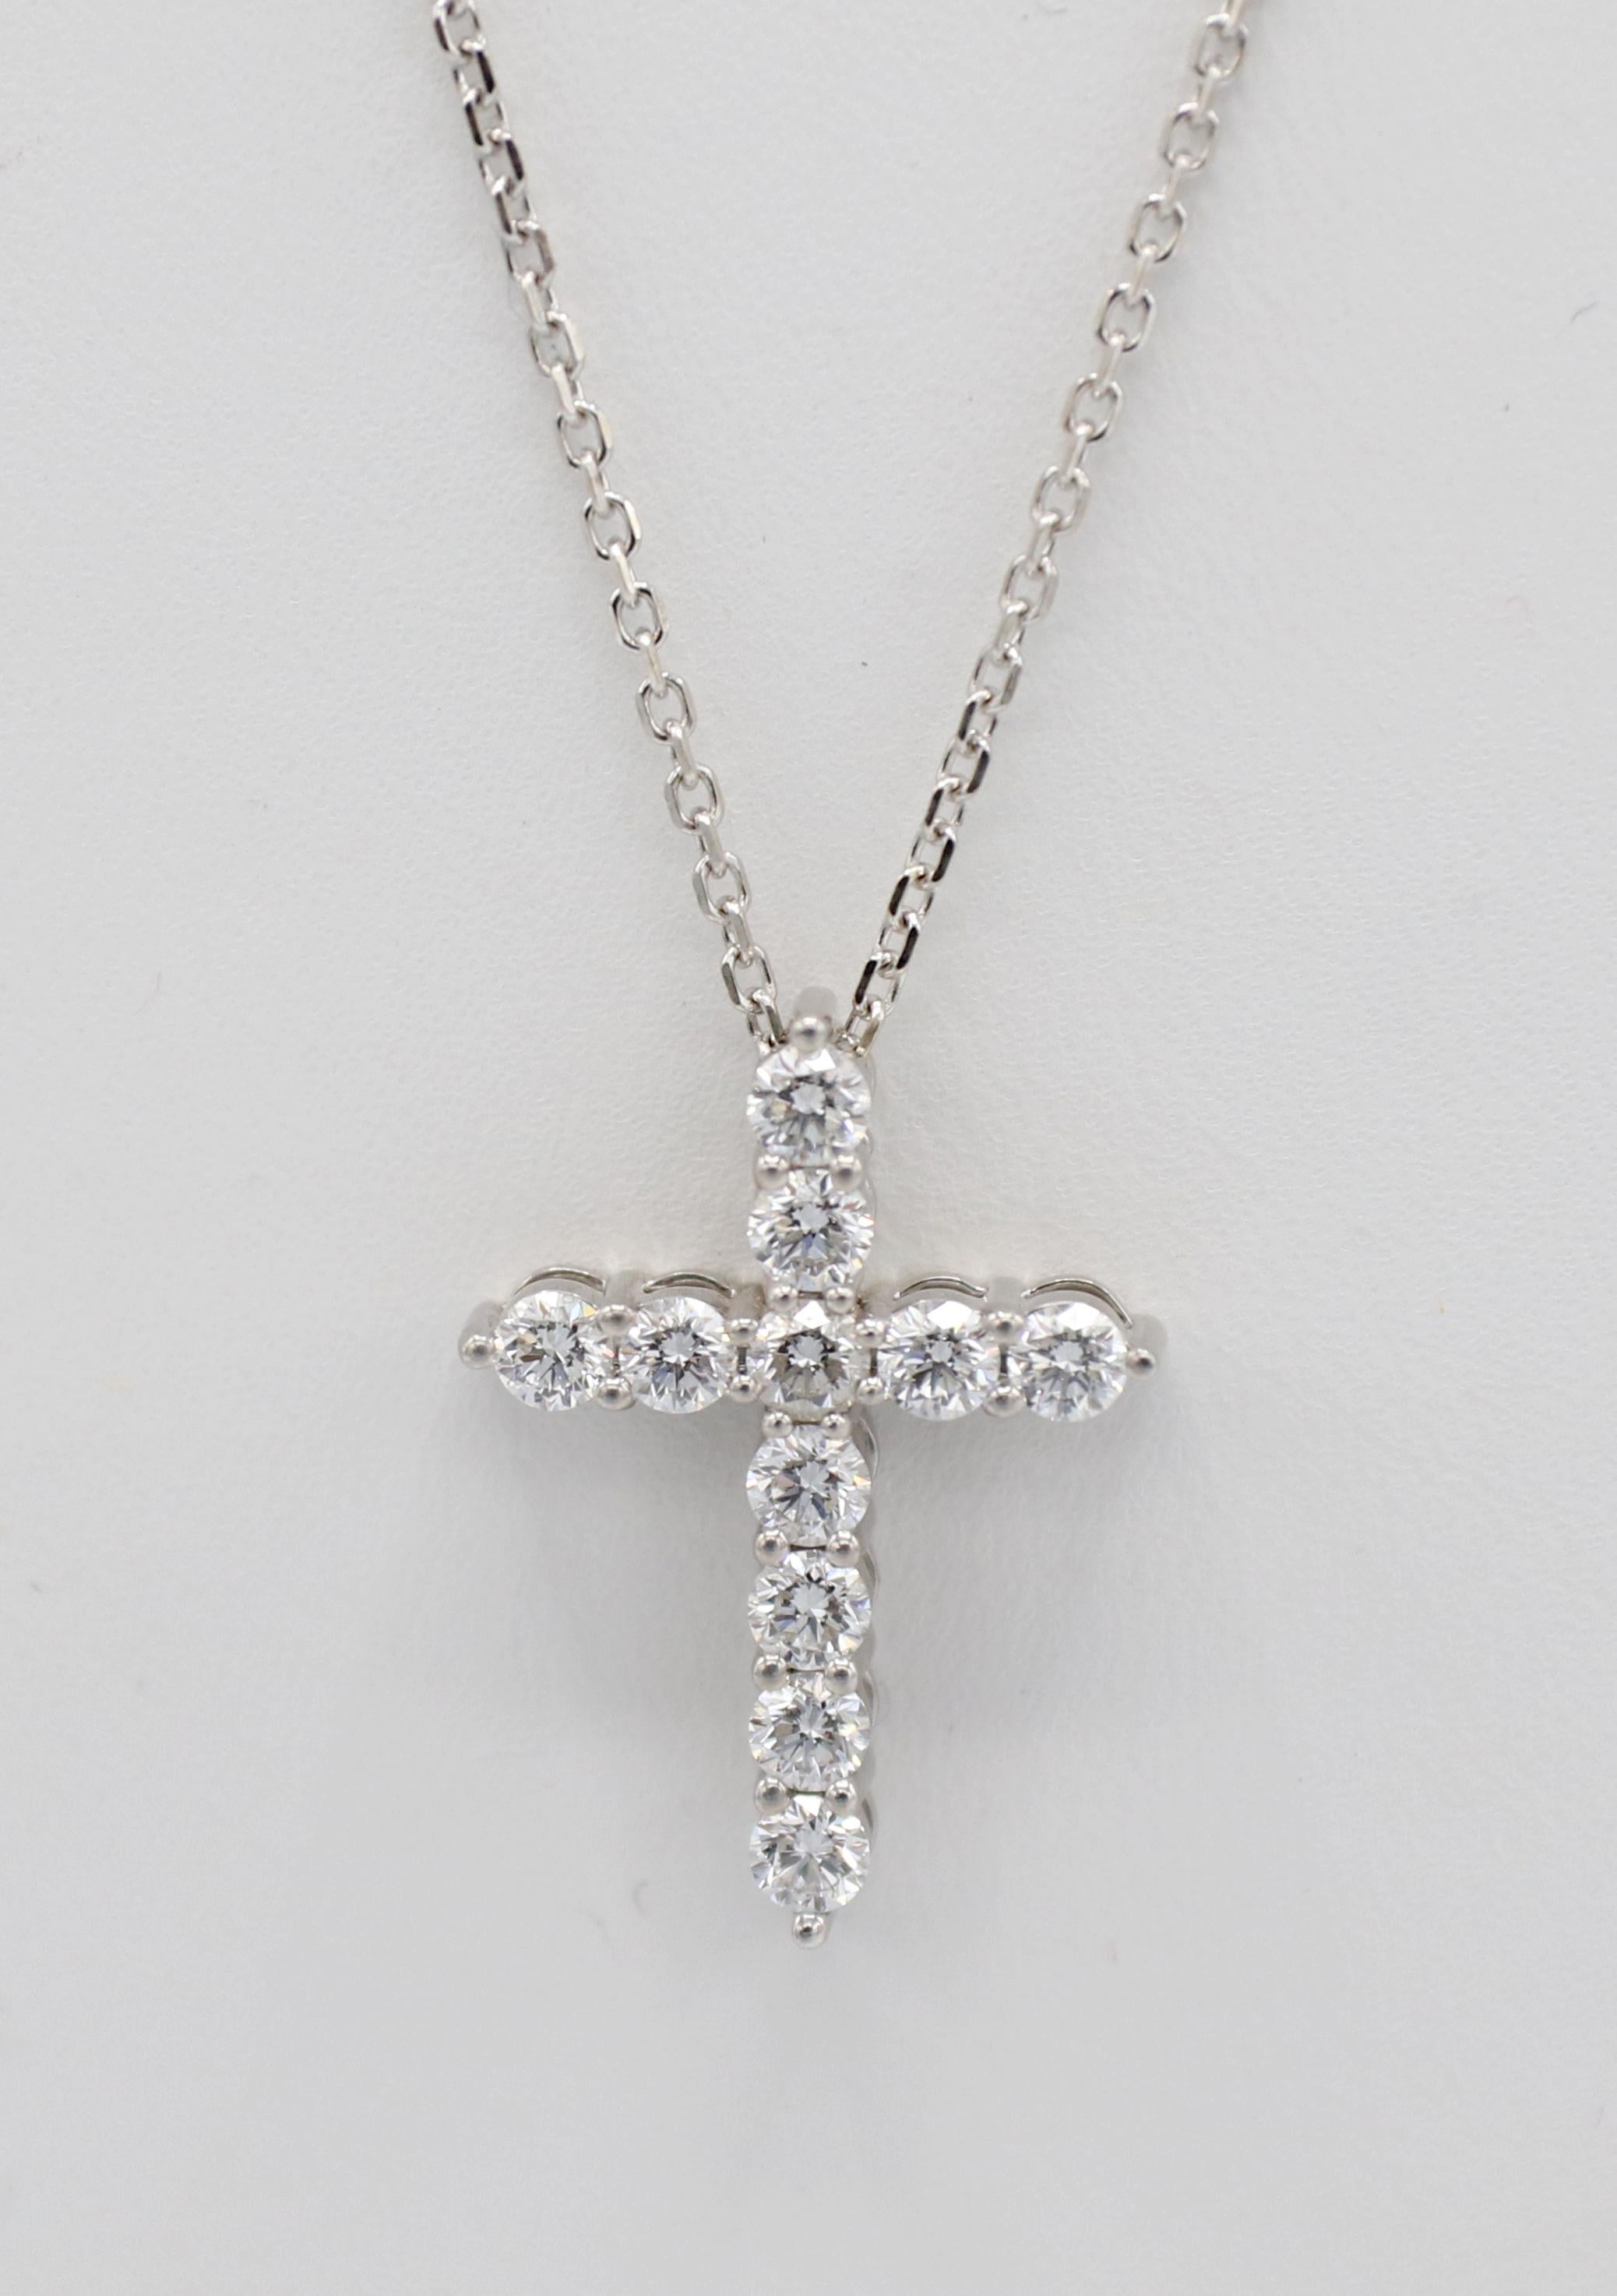 14 Karat White Gold 1.00 Carat Natural Diamond Cross Pendant Drop Necklace 
Metal: 14k white gold
Weight: 4.65 grams
Diamonds: Approx. 1.00 CTW F-G VS round natural diamonds
Cross: 22.5 x 16.5mm
Chain length: 18 inches, adjustable to 17 & 16 inches
